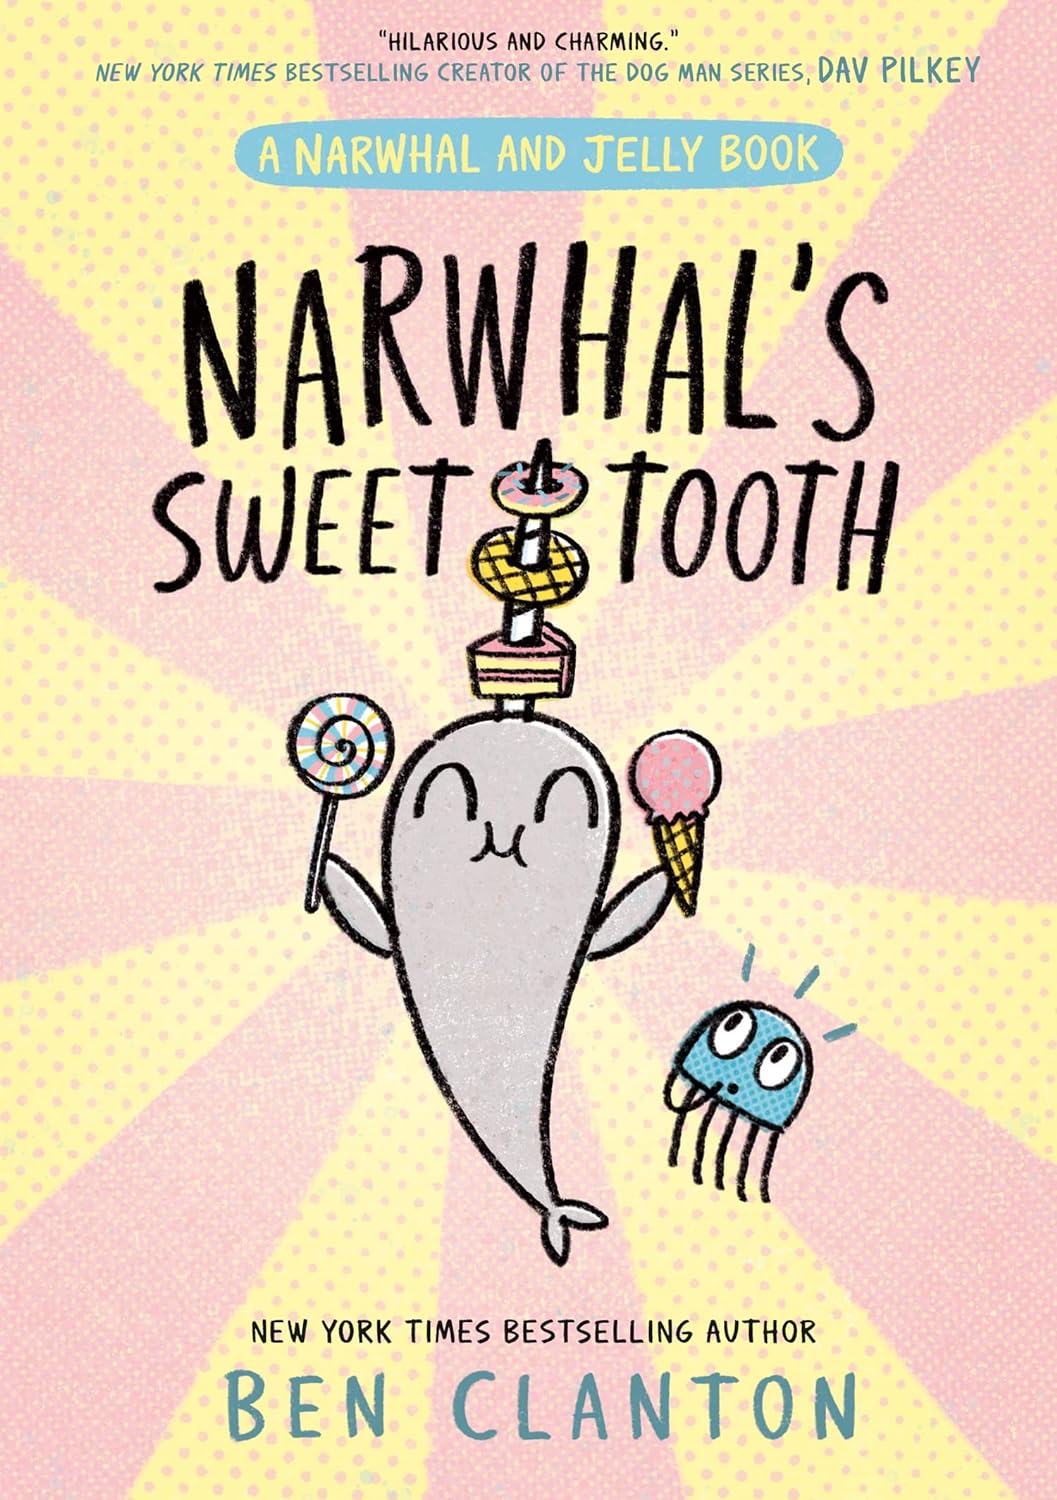 A Narwhal and Jelly Book 9: Narwhal's Sweet Tooth